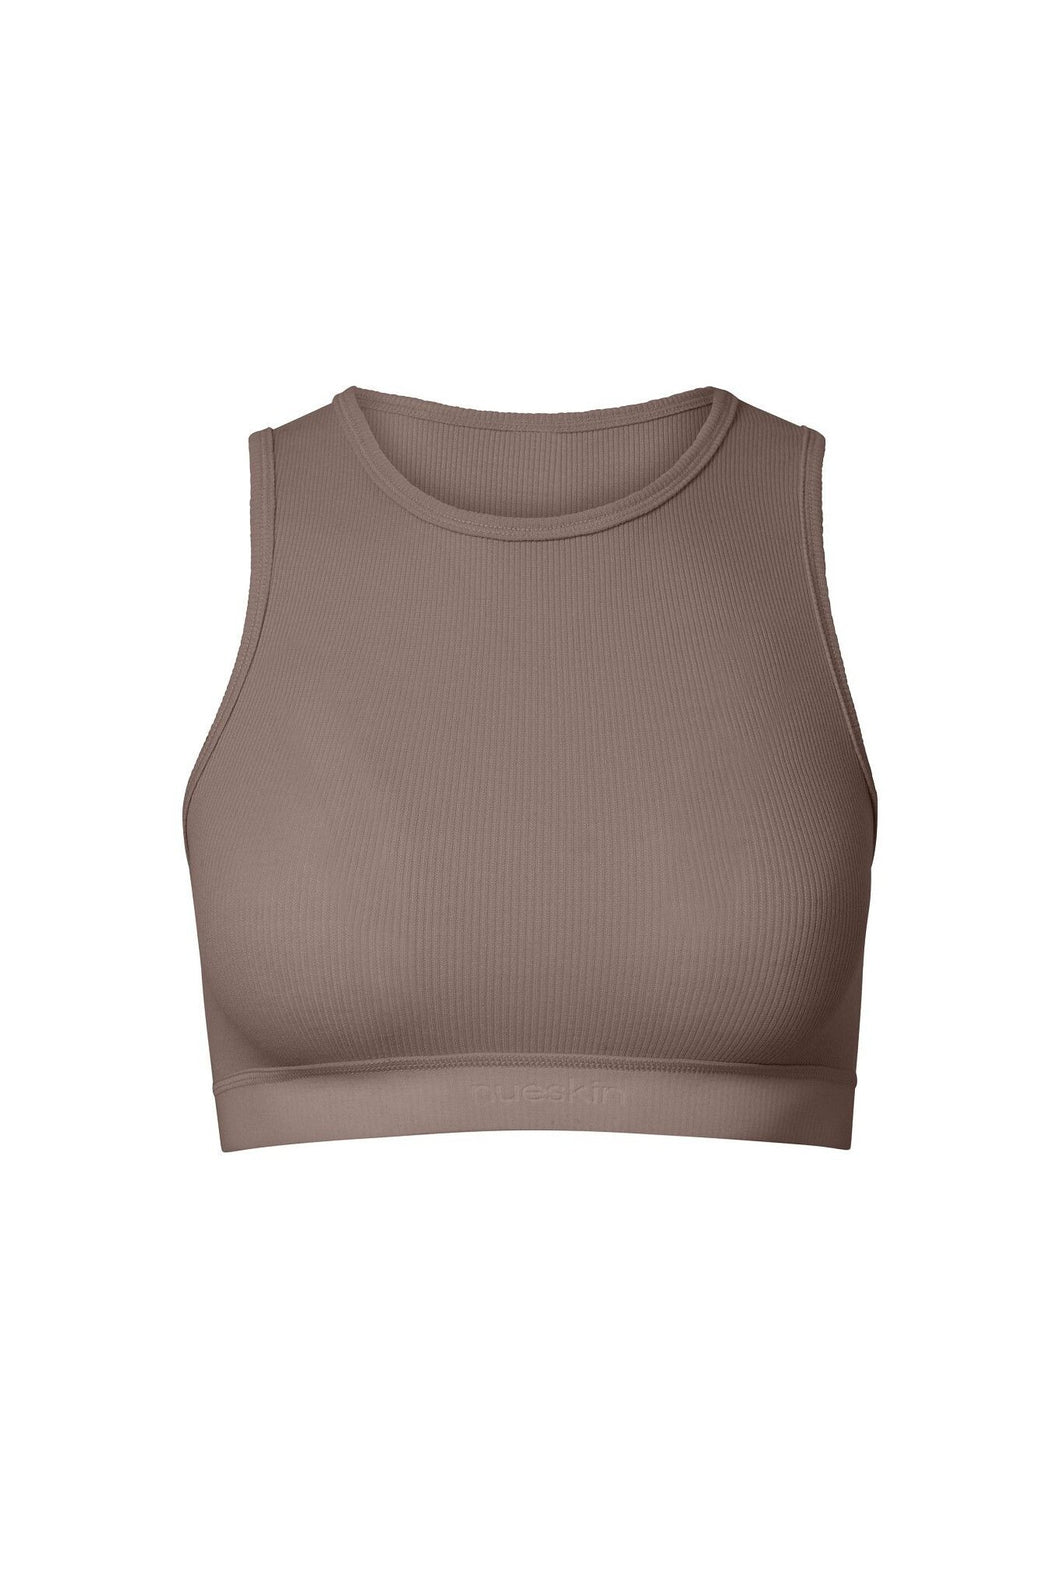 nueskin Izzy in color Deep Taupe and shape bralette